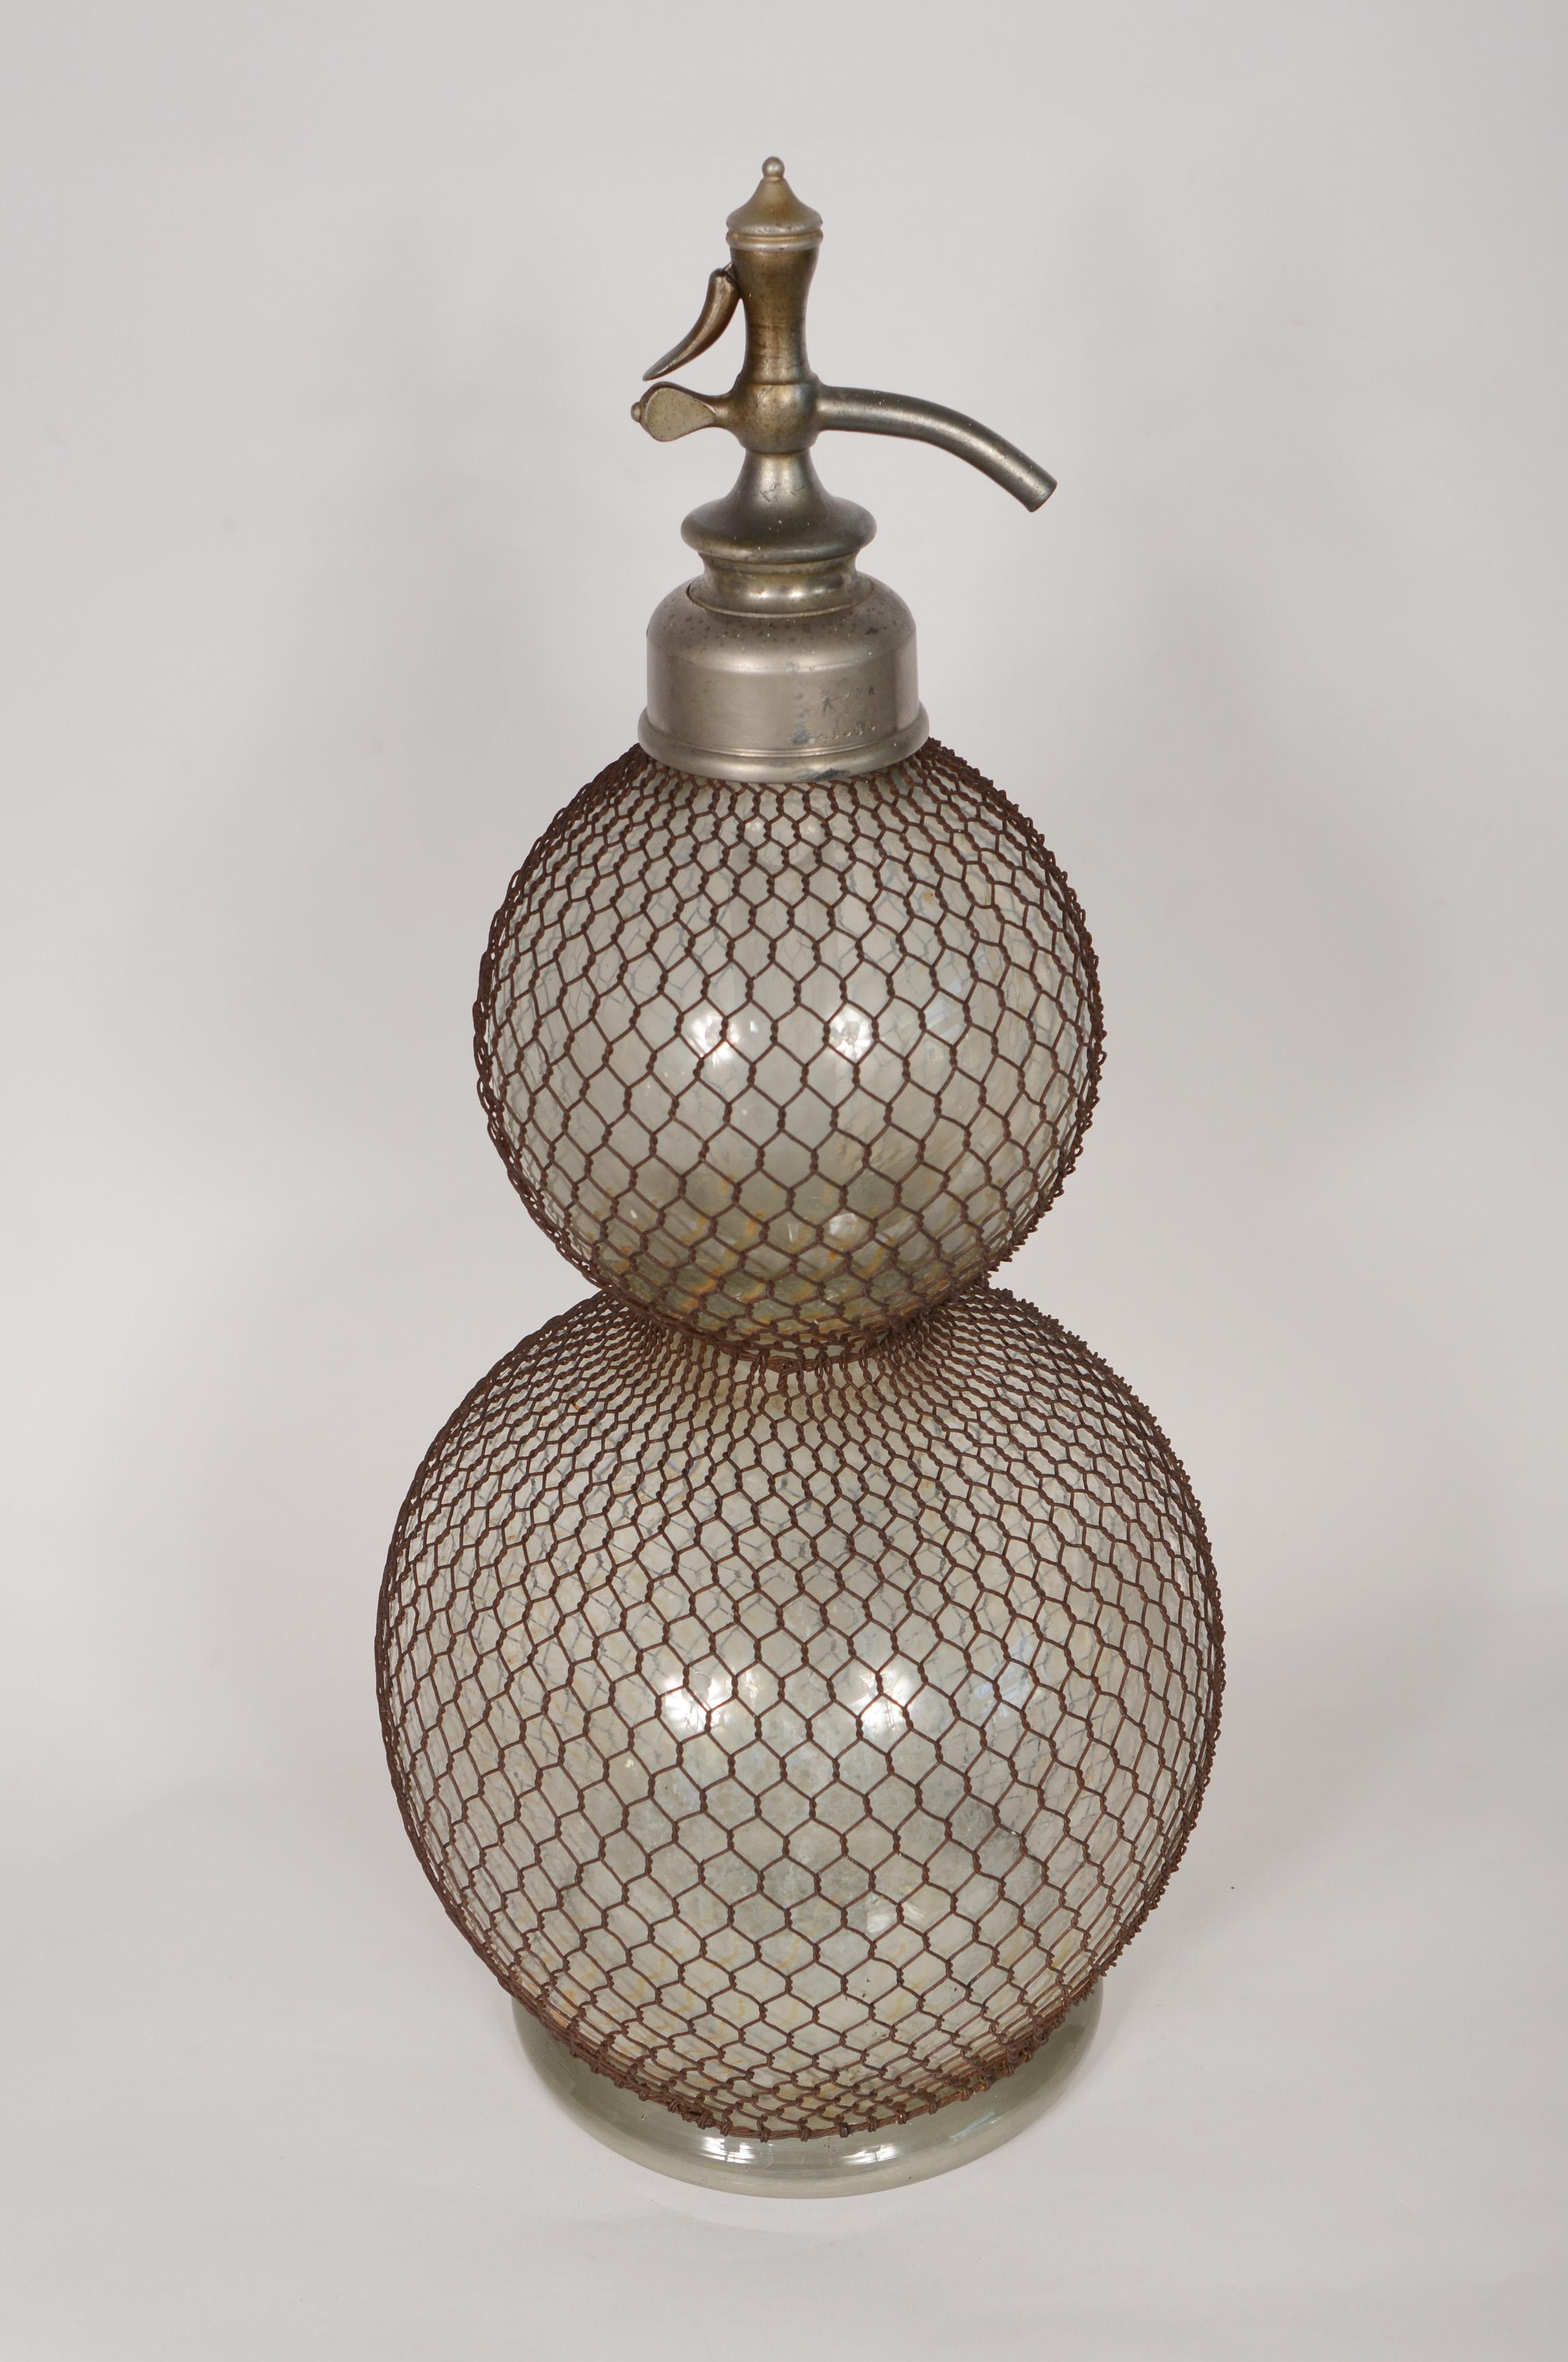 French seltzer bottle from the late 19th or early 20th century. This has wire mesh over a glass double ball form. The lever is stuck in the down position. The mesh has surface rust. There is some rust transfer to the glass. The inside of the glass